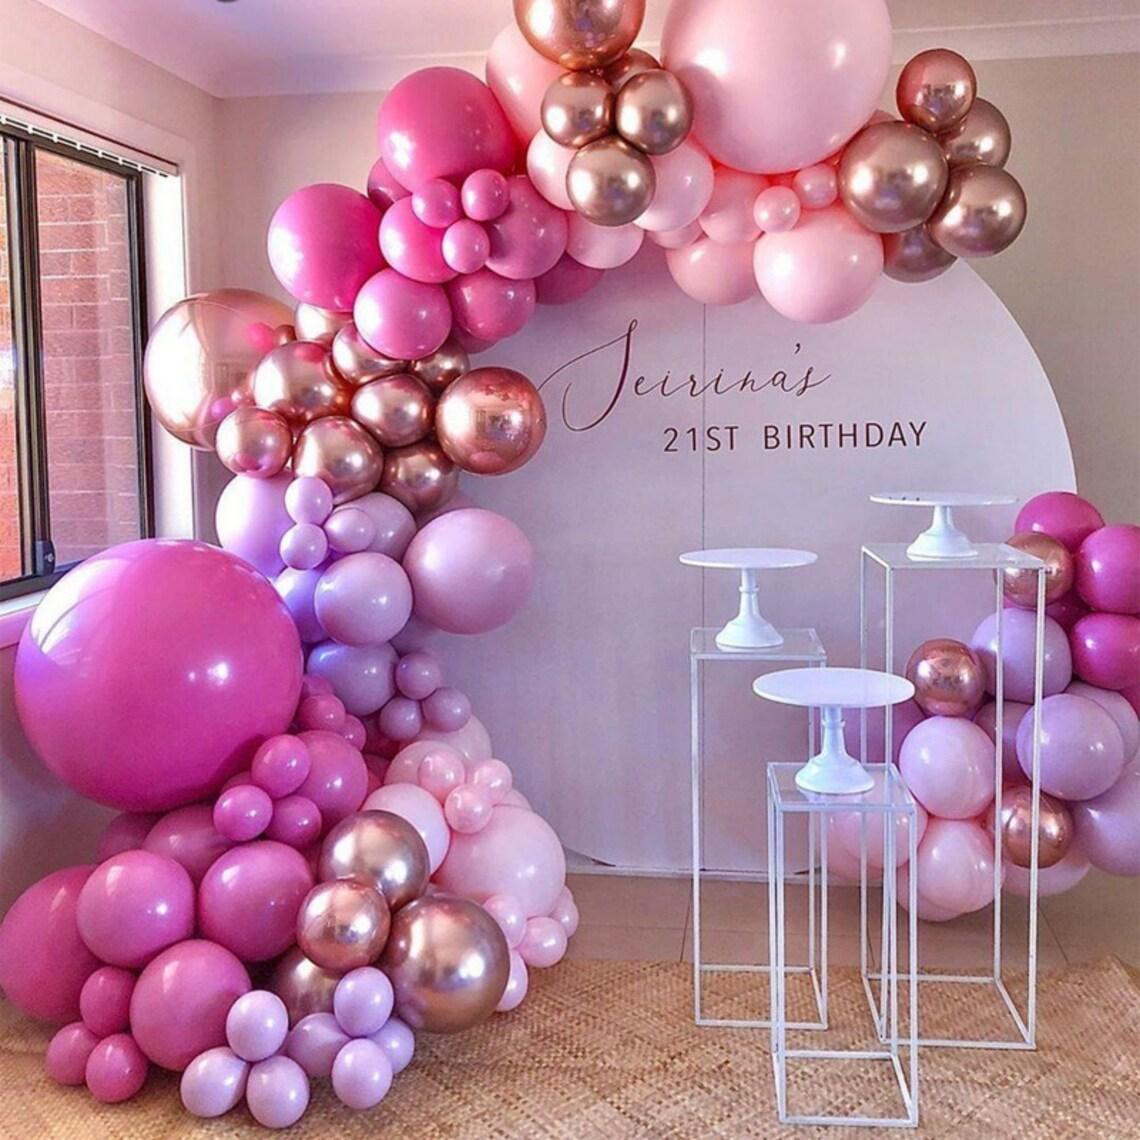 126PCS Hot Pink Balloon Garland Arch Kit Baby Pink Purple Chrome Rose Gold for Birthday Baby Shower Wedding Party Decoration - If you say i do